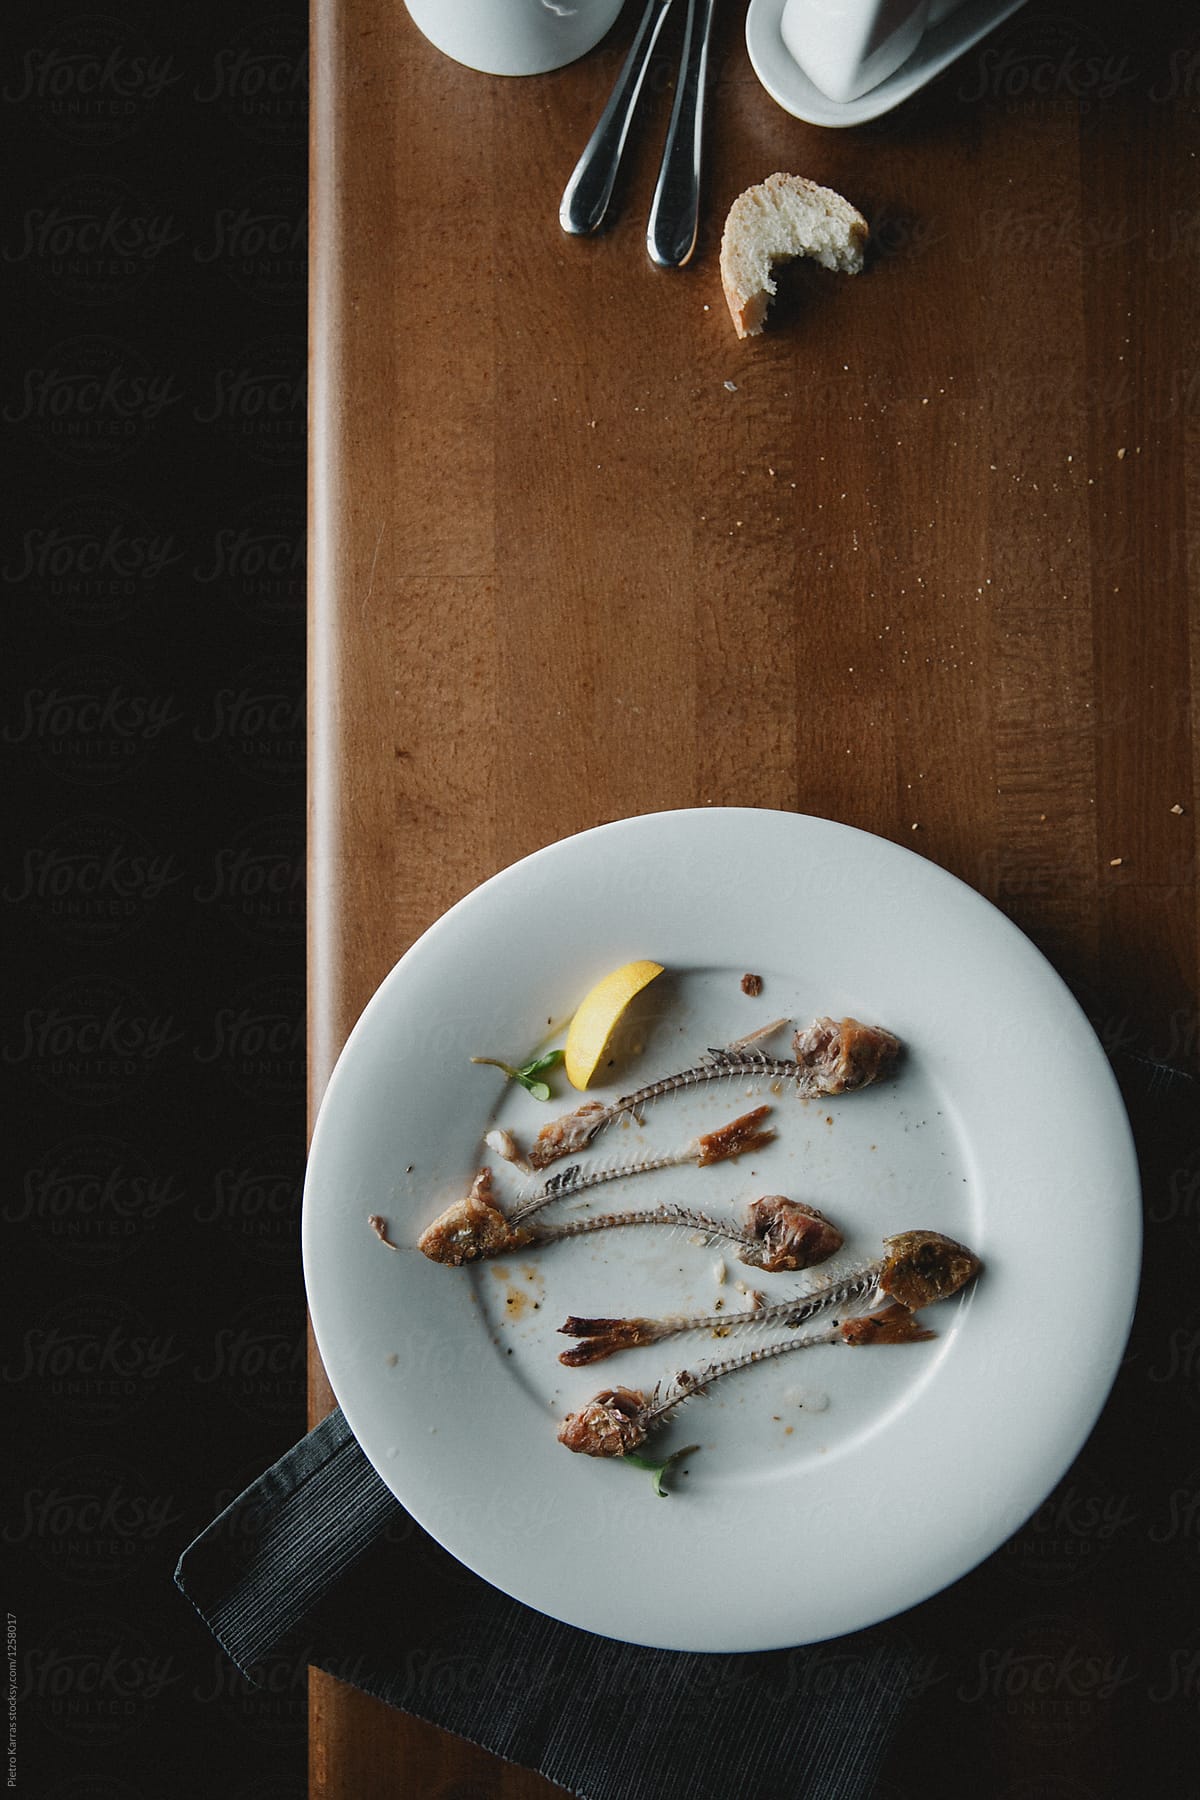 Plate with fish bones